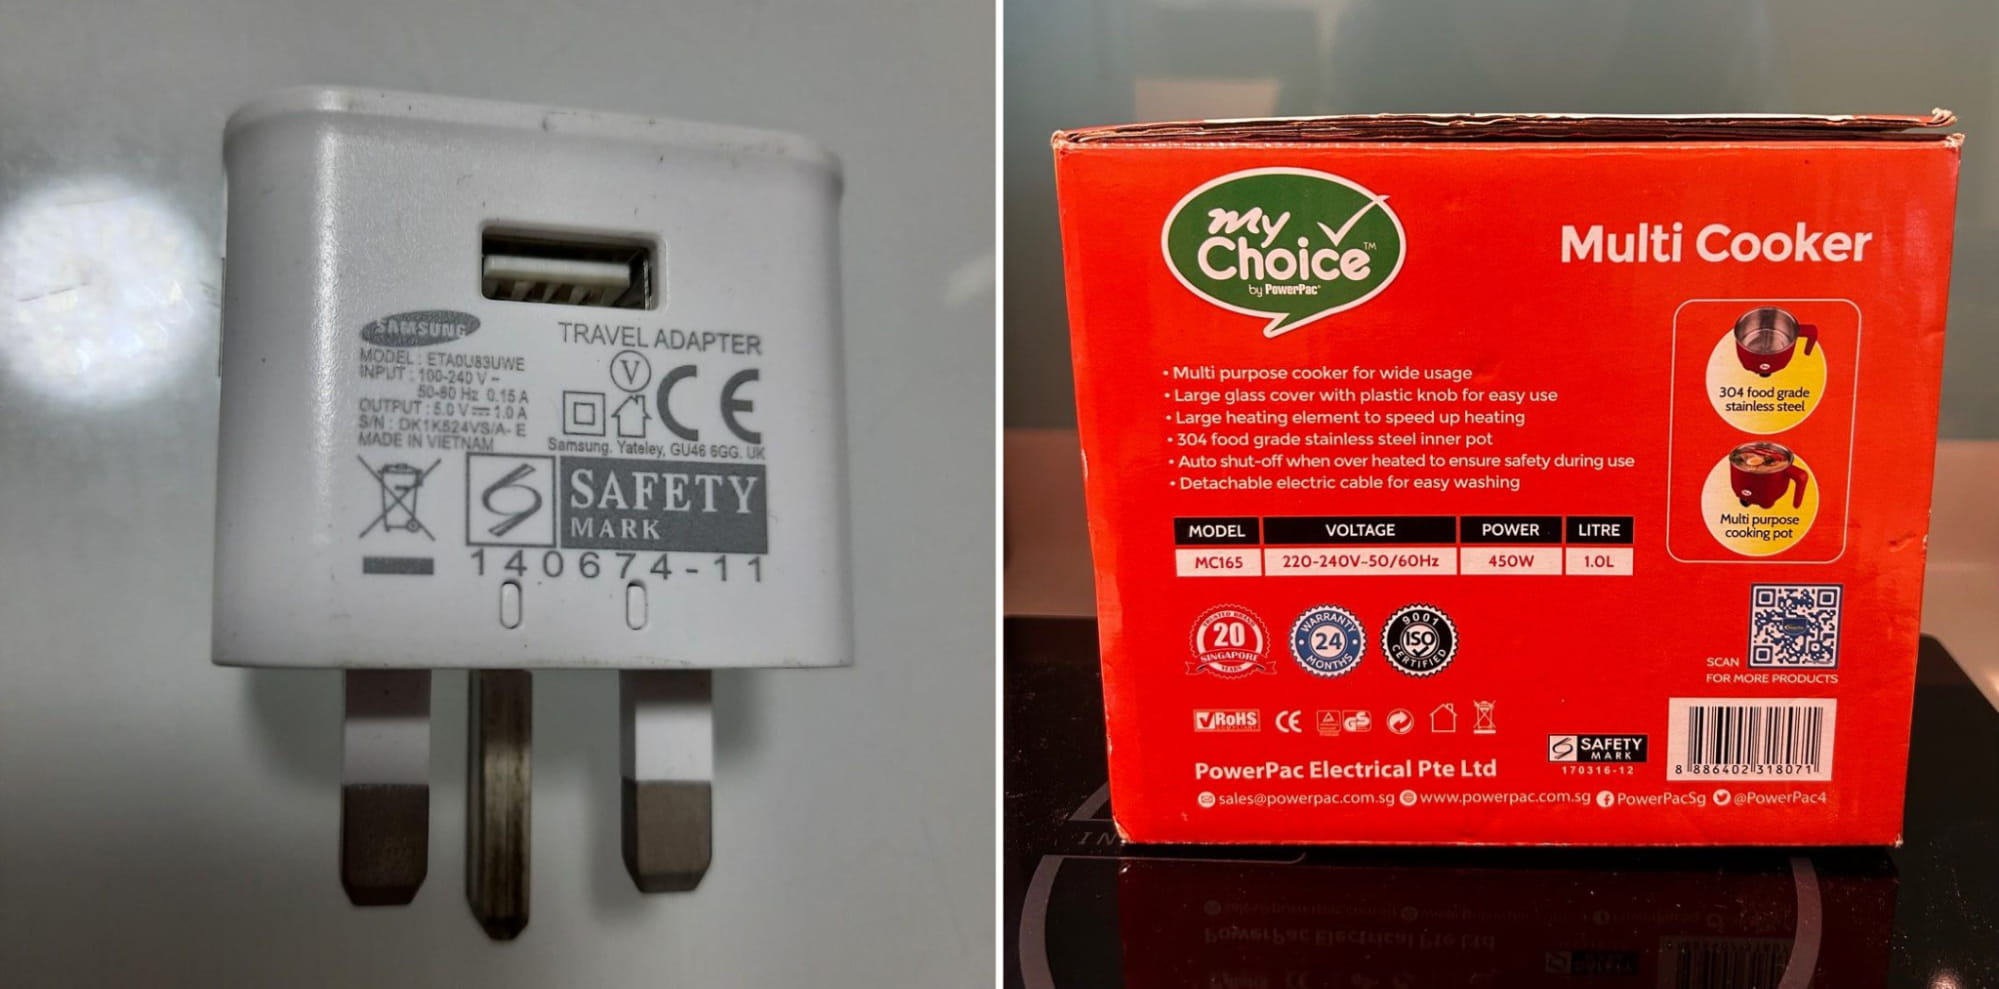 safety mark on electronic products in singapore